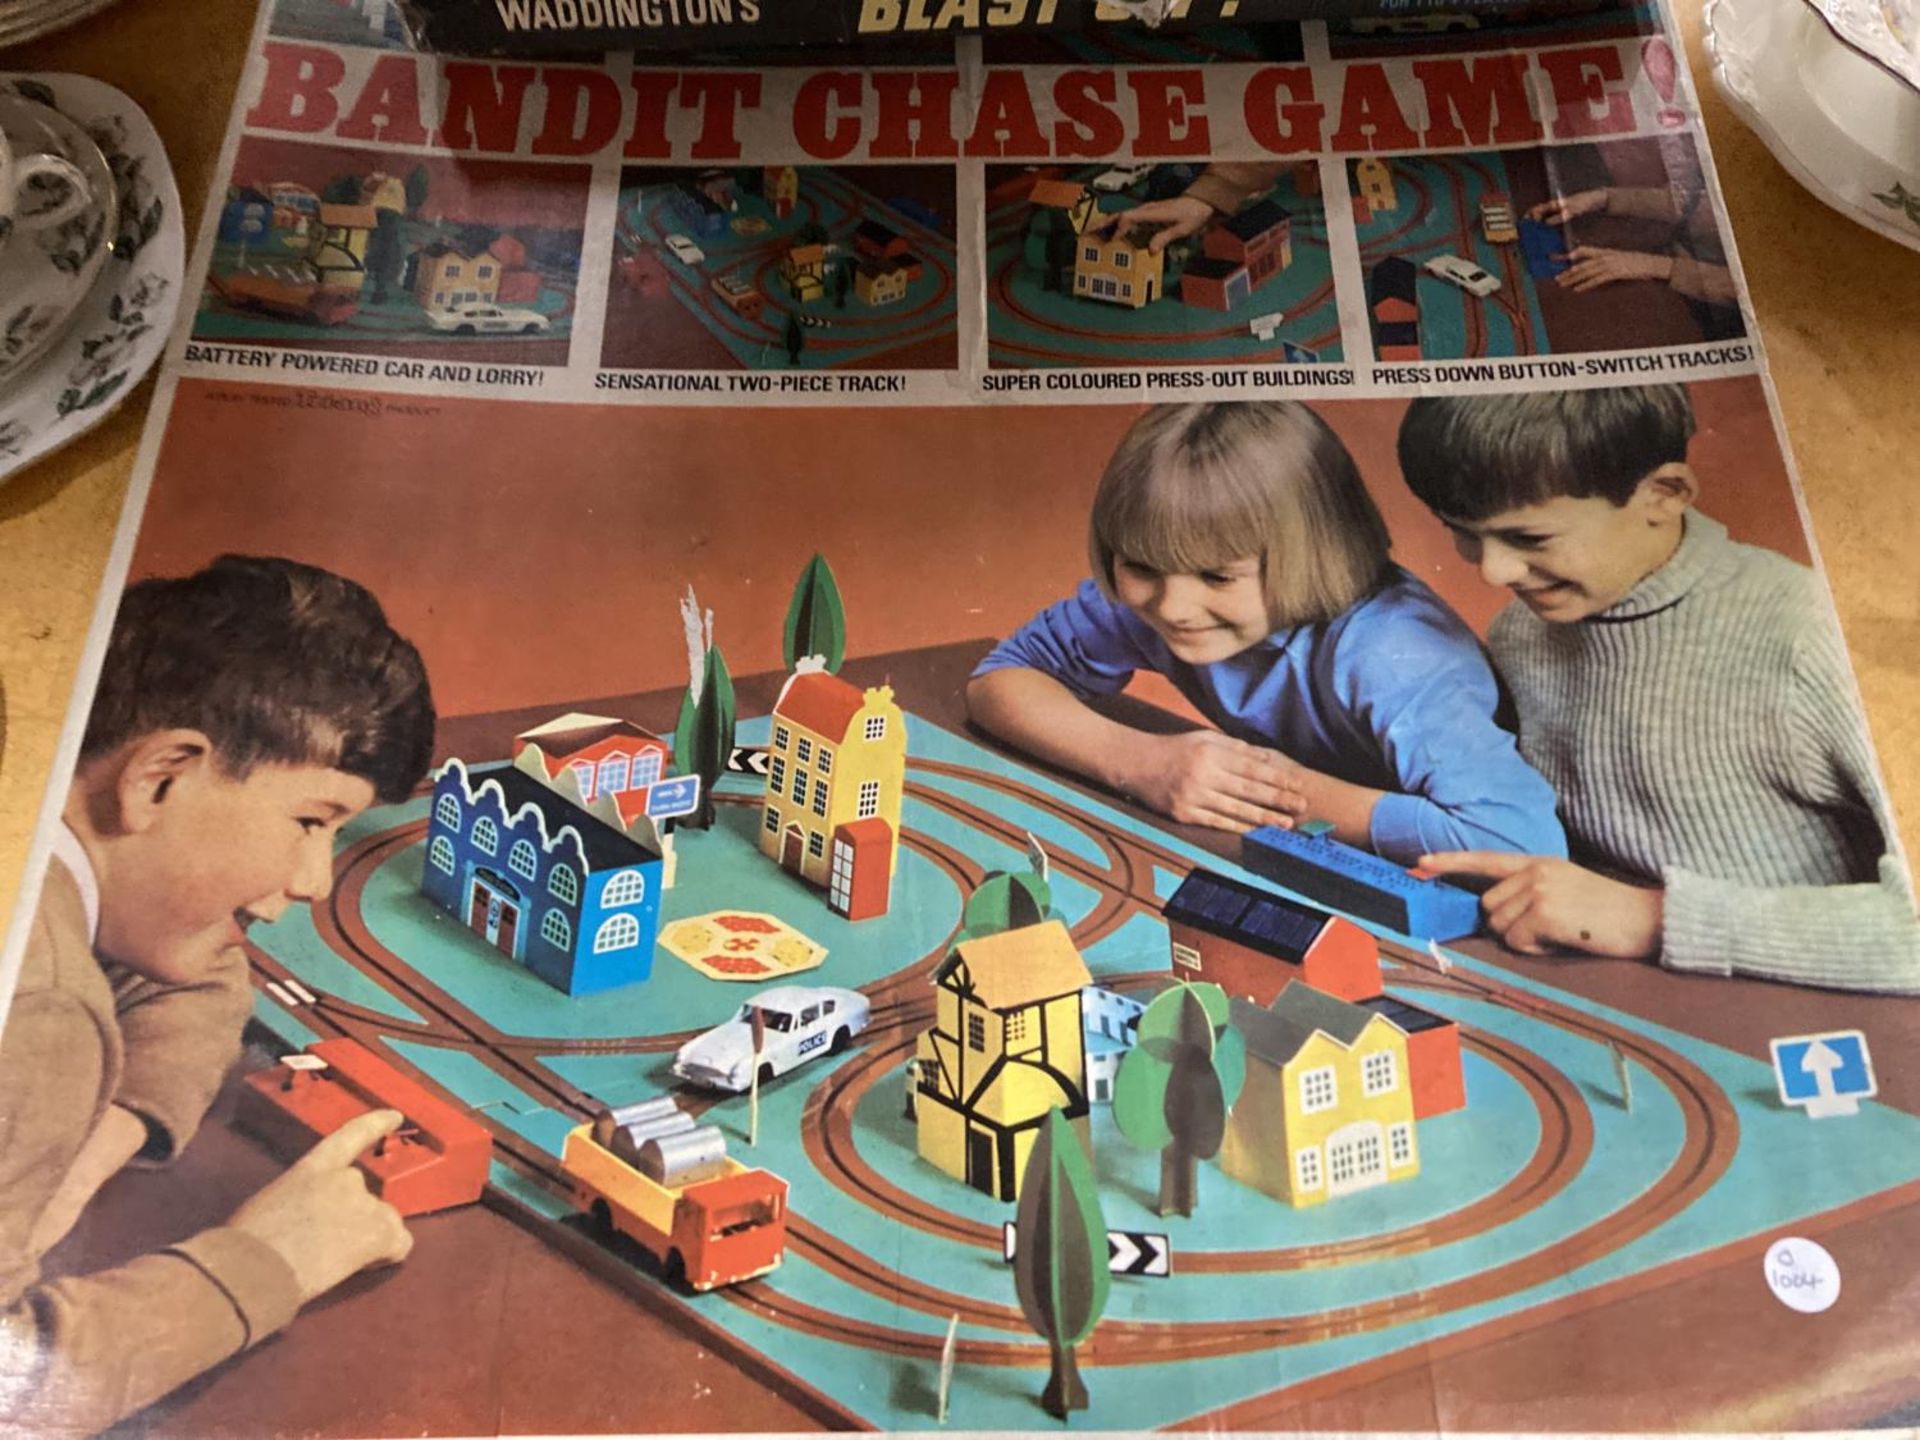 FOUR VINTAGE BOARD GAMES TO INCLUDE 'BANDIT CHASE GAME', MULTI-COLOURED SWAP SHOP, WADDINGTON'S - Image 2 of 3